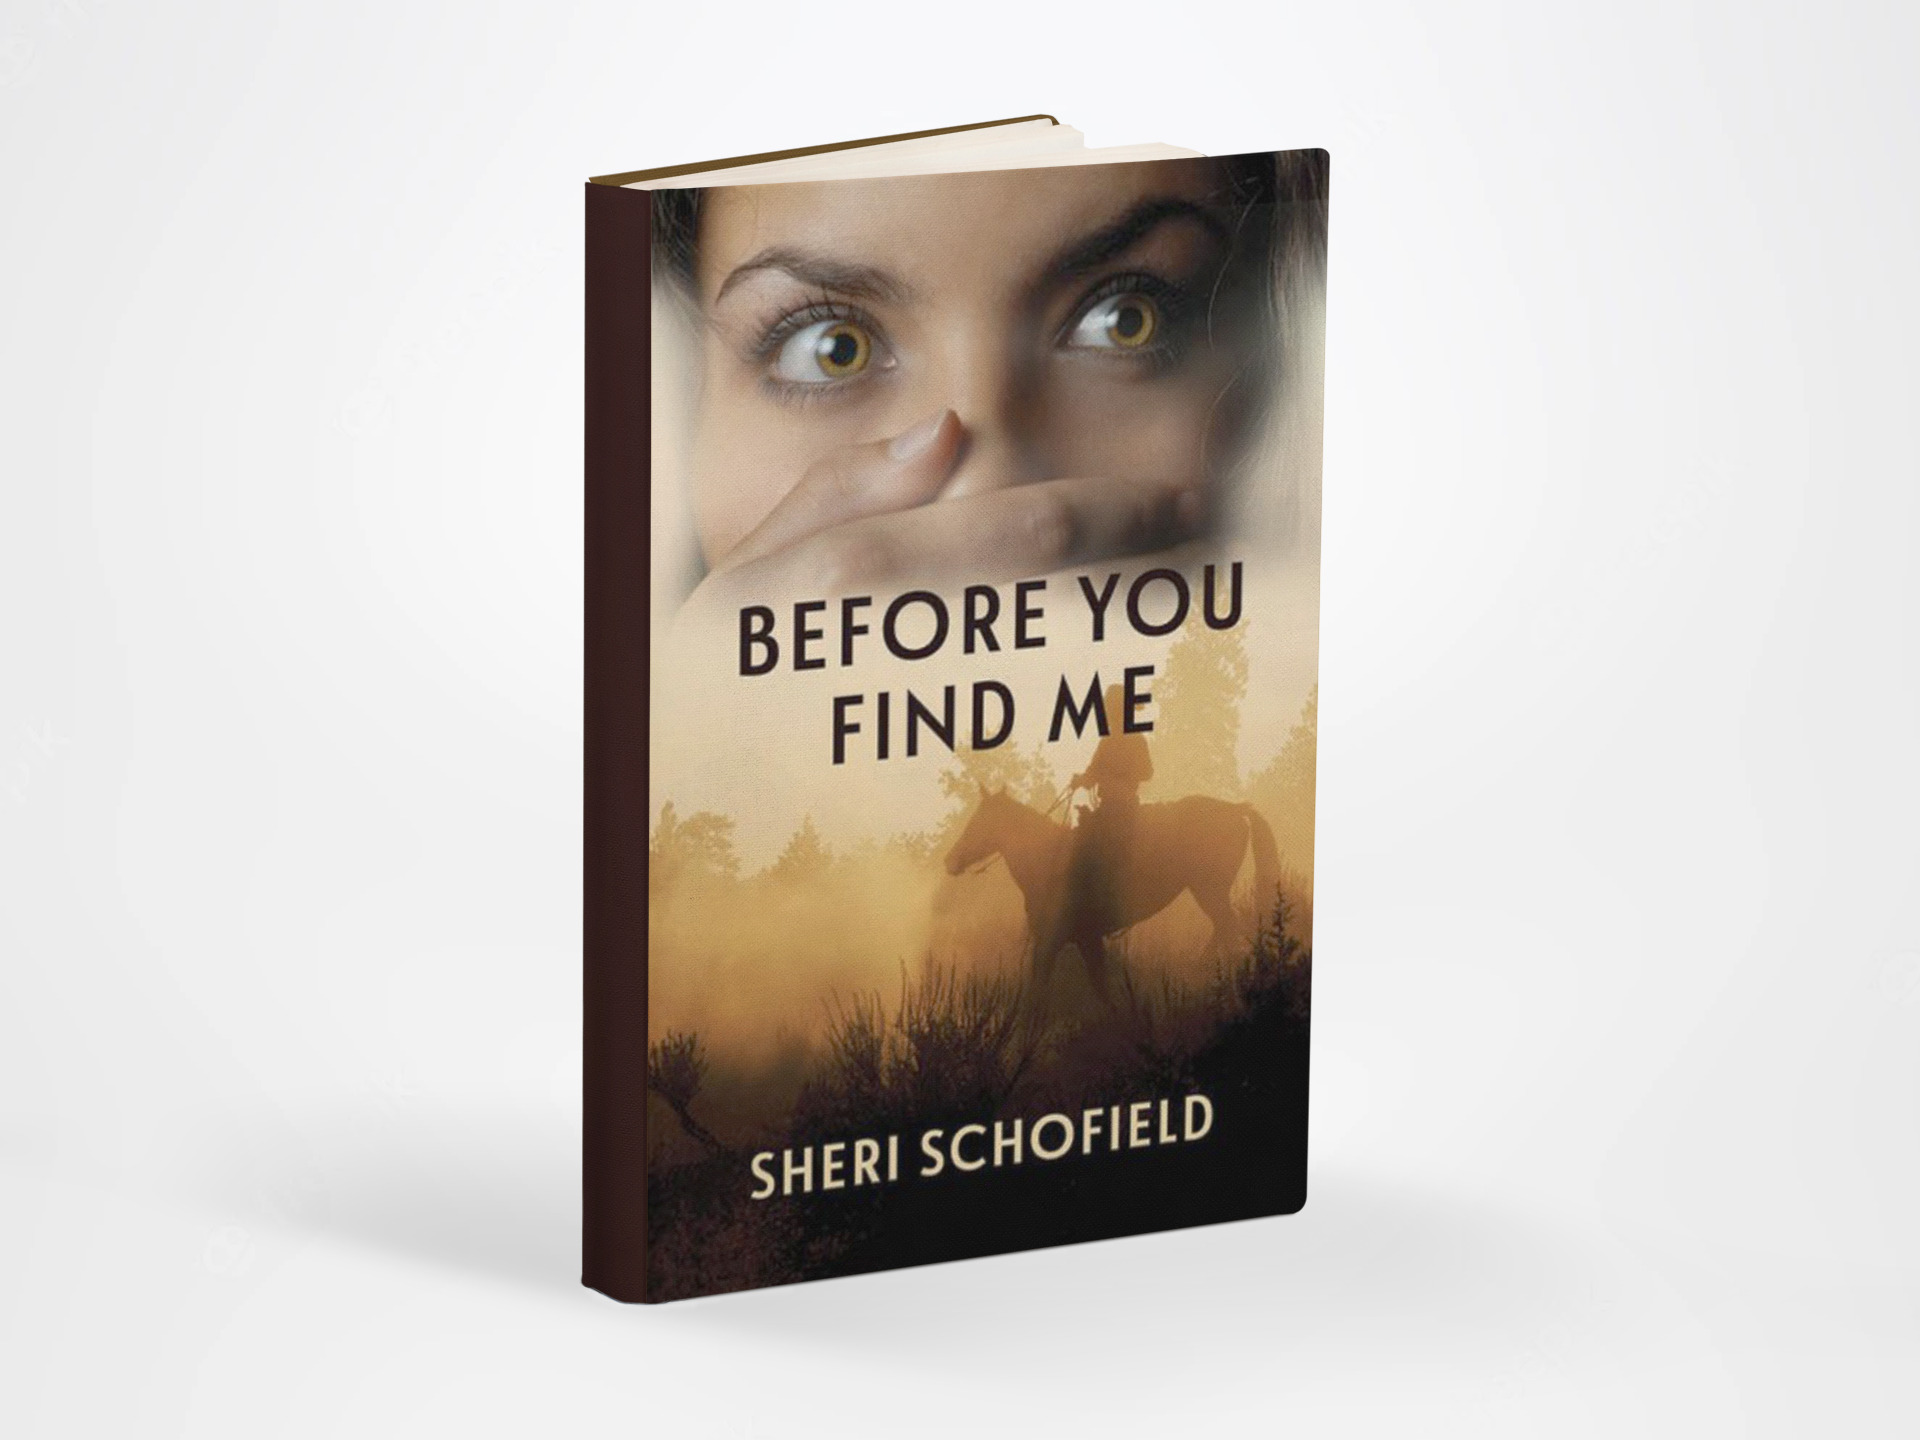 Sheri Schofield’s Before You Find Me is a Spell-Binding Romantic Suspense Novel That Inspires Readers to Trust God in Difficult Times 1